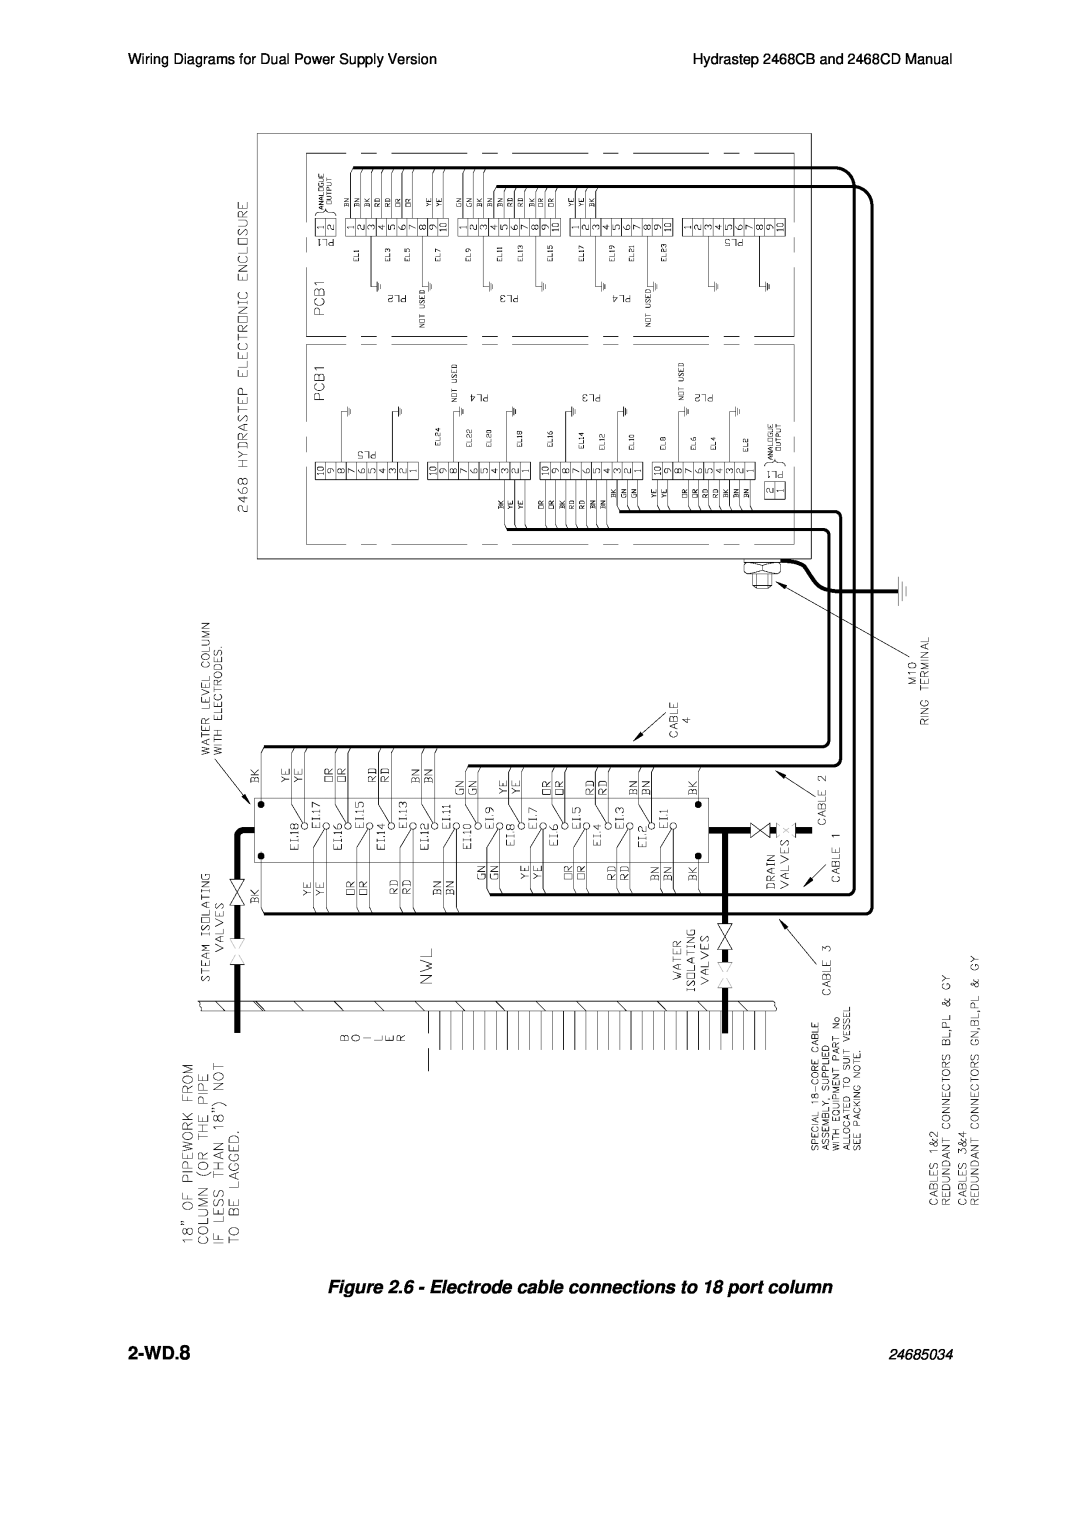 Emerson manual 2-WD.8, Wiring Diagrams for Dual Power Supply Version, Hydrastep 2468CB and 2468CD Manual, 24685034 